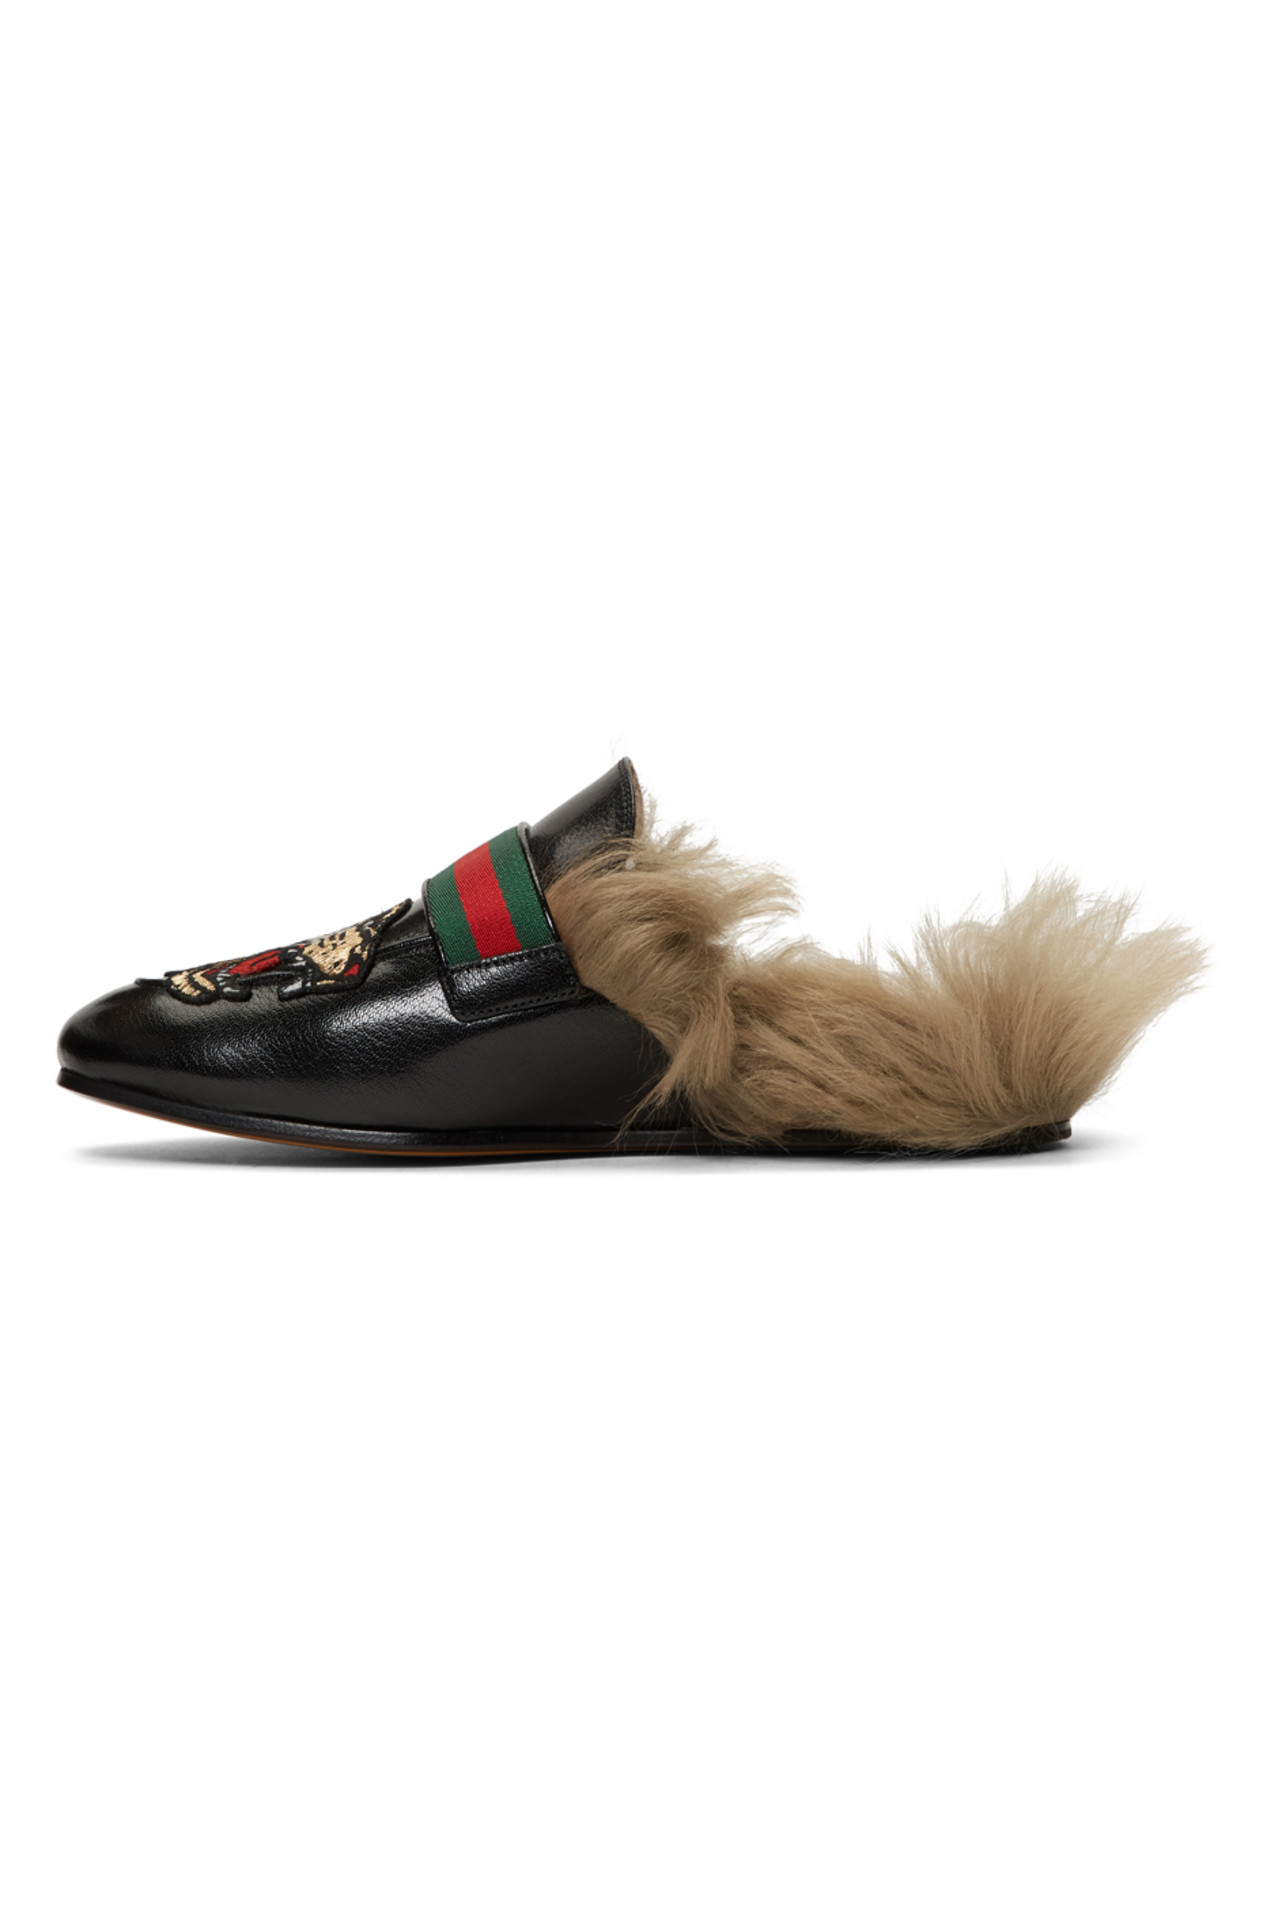 gucci-black-angry-cat-new-princetown-loafers.jpg